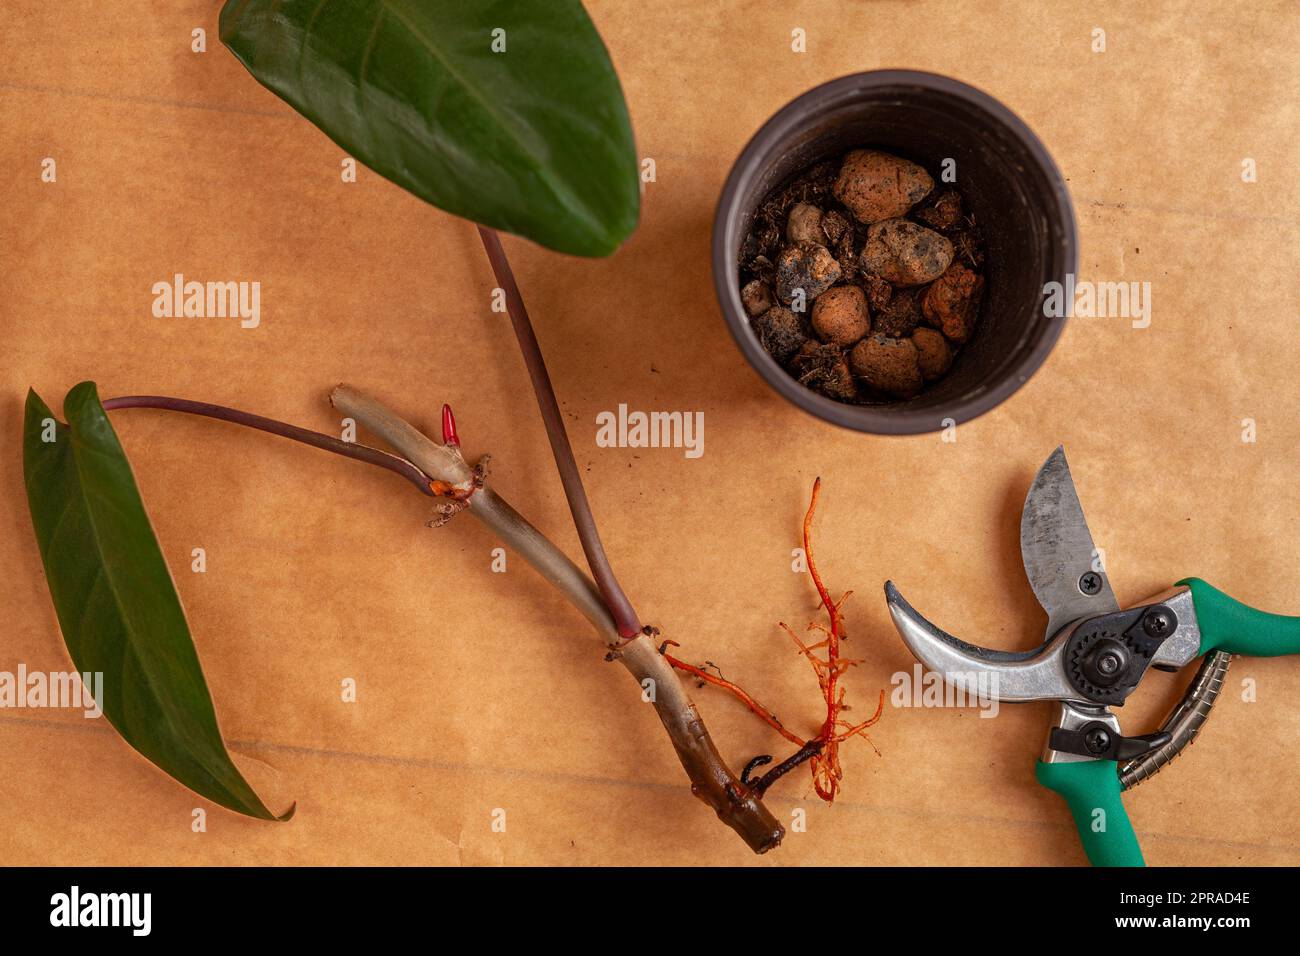 Concept of a home garden. Preparation of the home plants for transplantation. Stock Photo